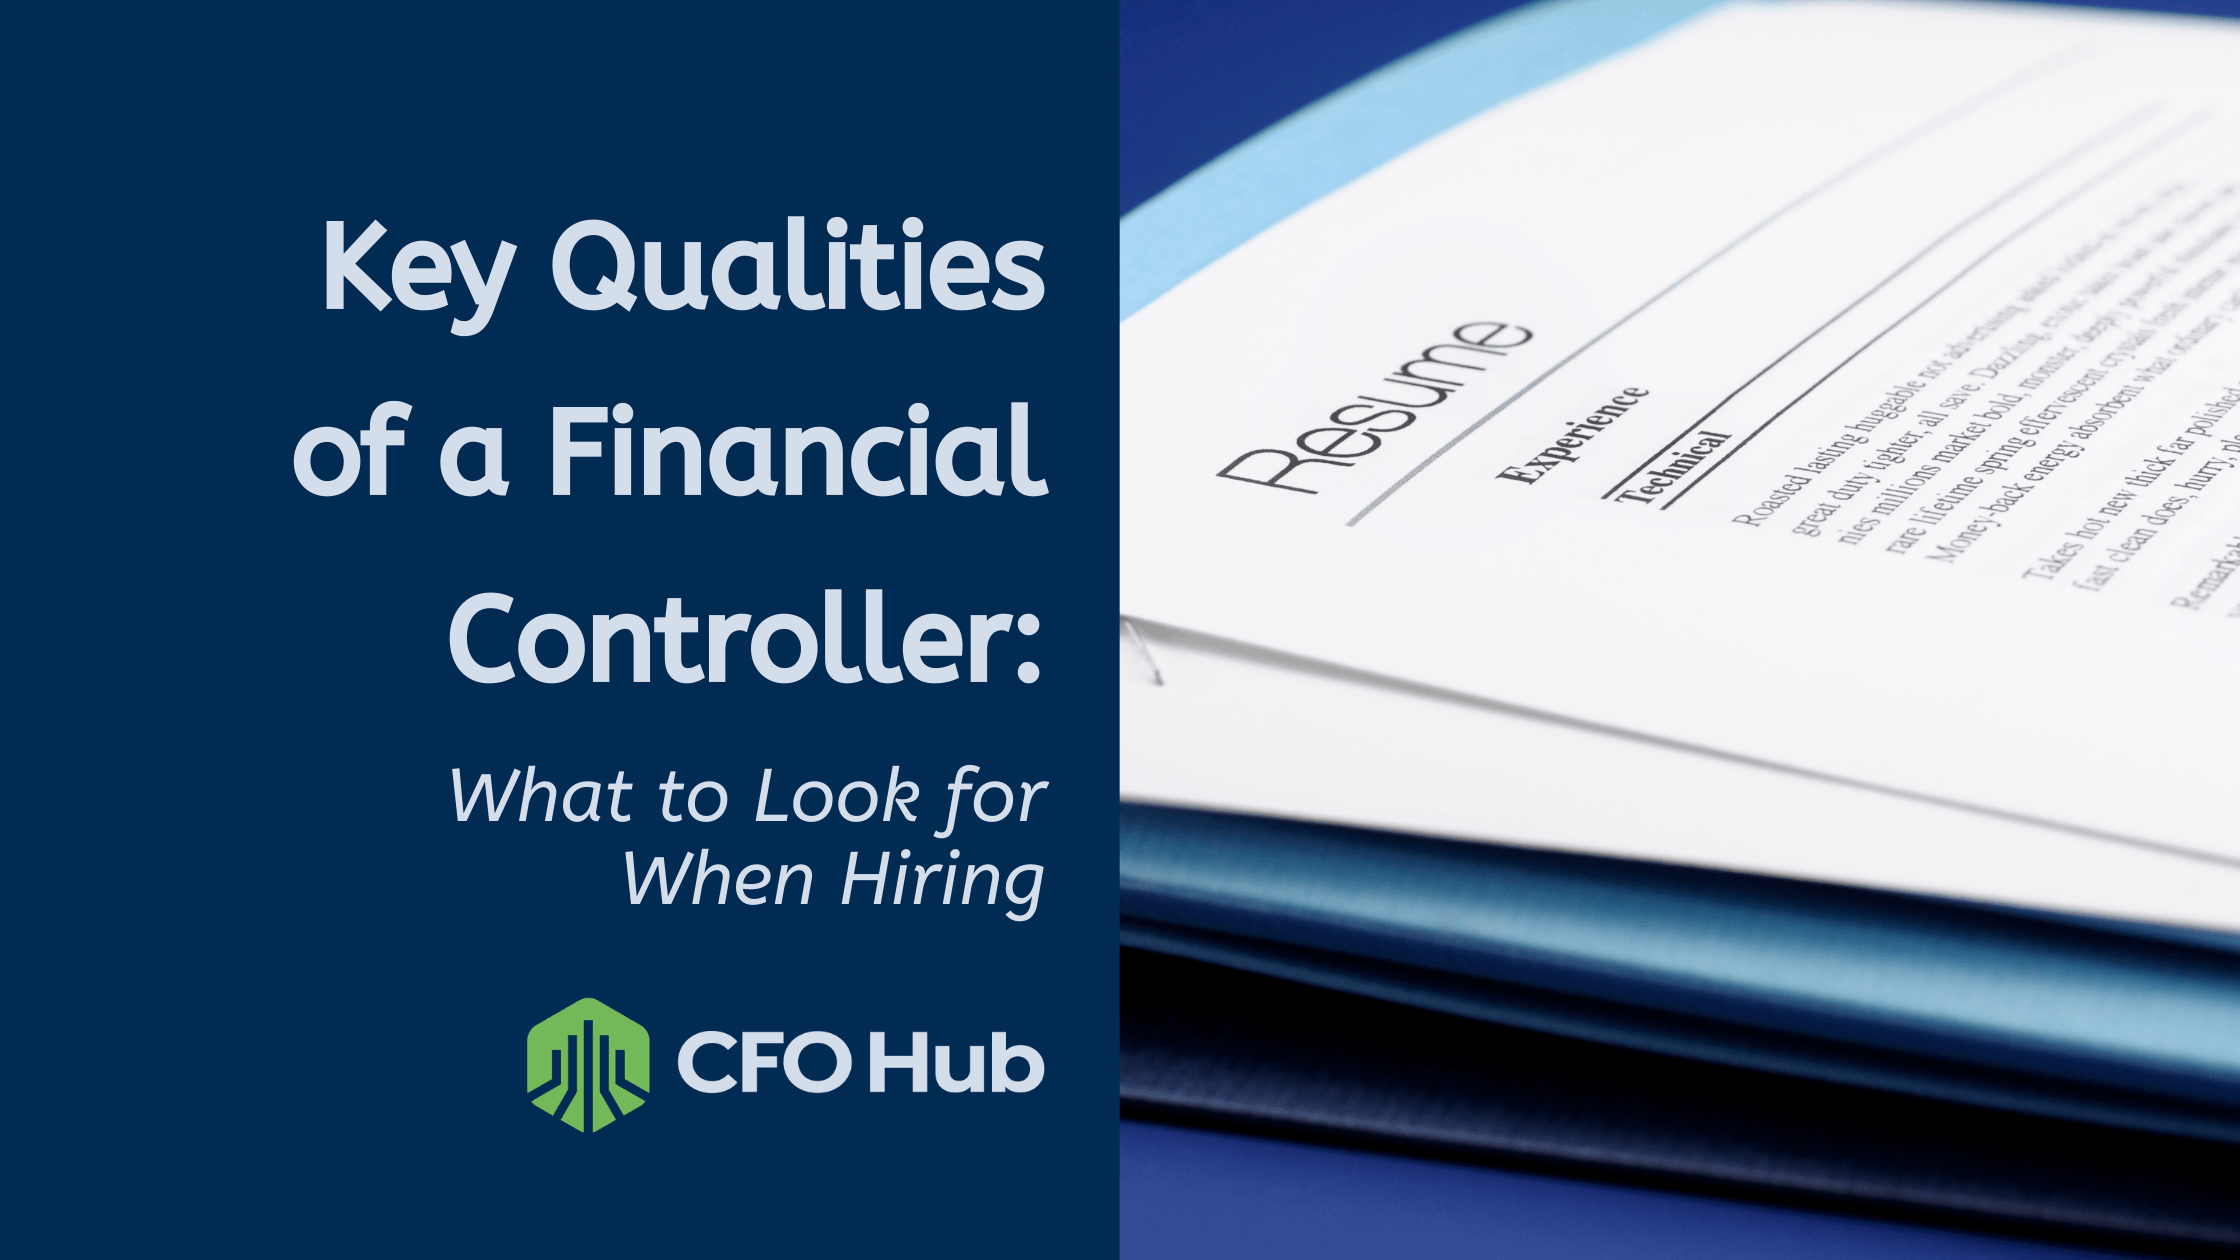 Key Qualities of a Financial Controller